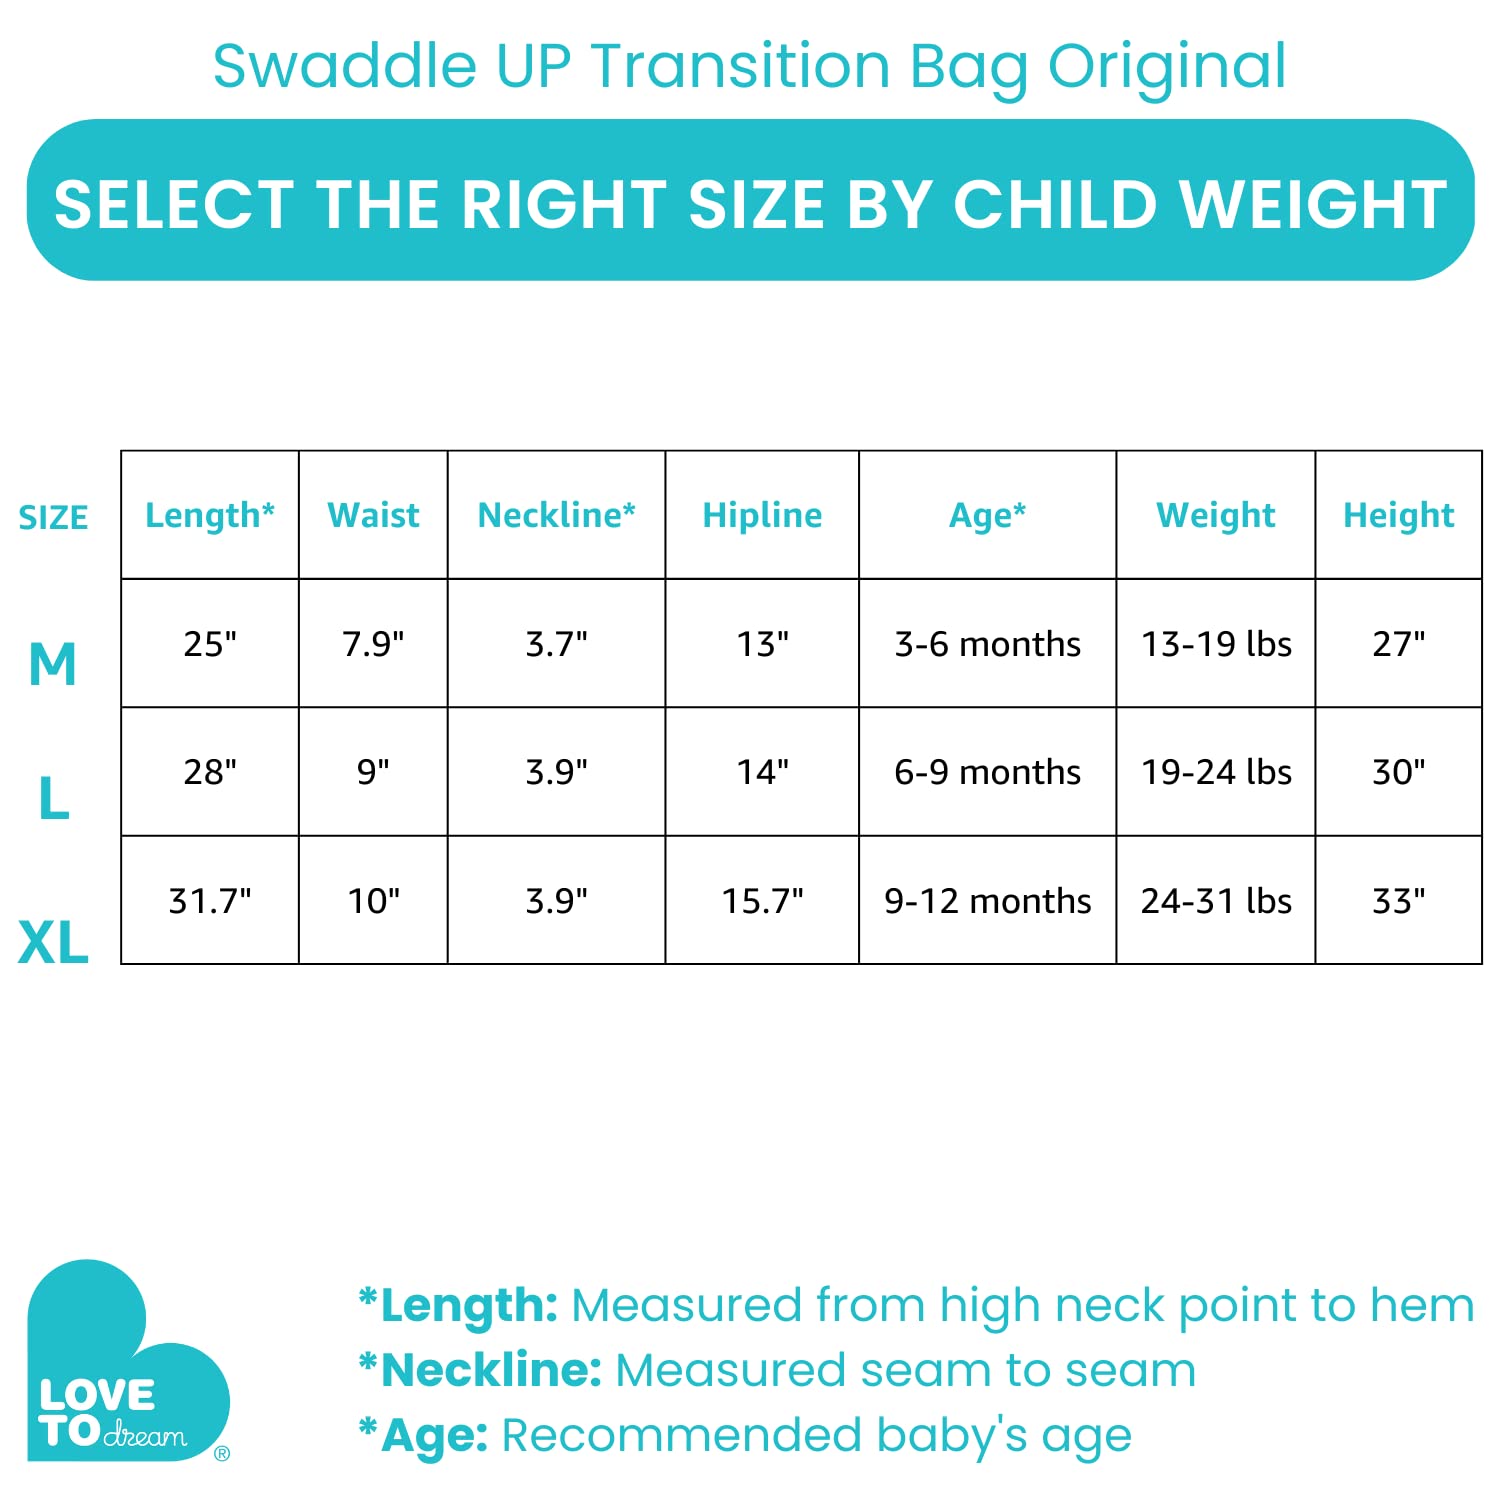 Love to Dream Swaddle UP Transition Bag Self-Soothing Sleep Sack 19-24 lbs, Patented Zip-Off Wings, Gently Help Baby Safely Transition from Swaddling to Arms Free Before Rolling, 1.0TOG Gray, Large